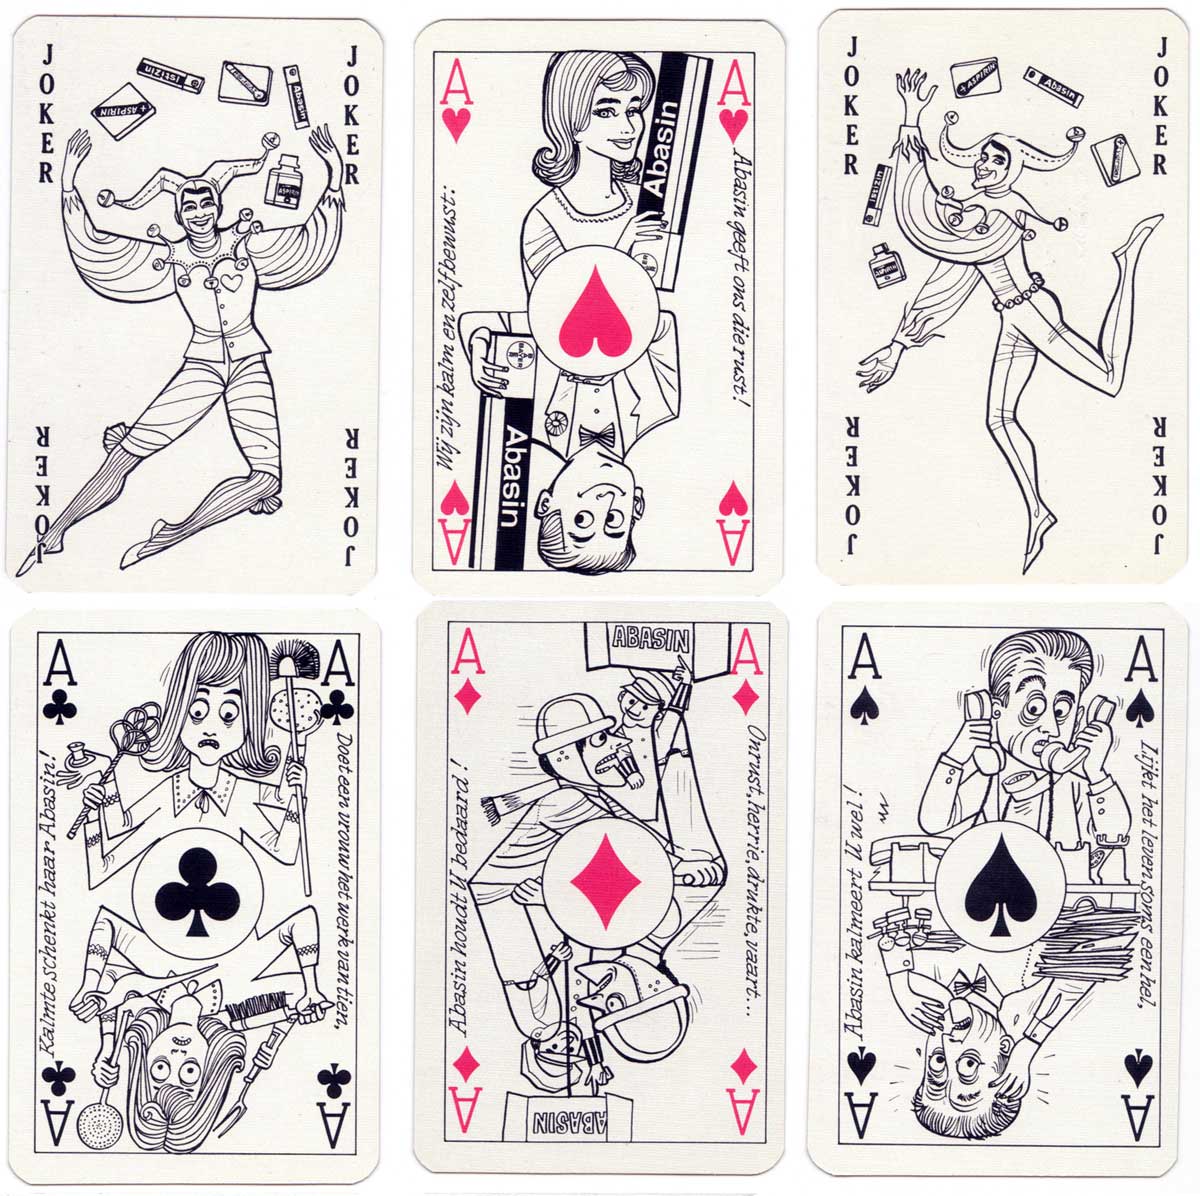 Bayer pharmaceutical playing cards, c.1963